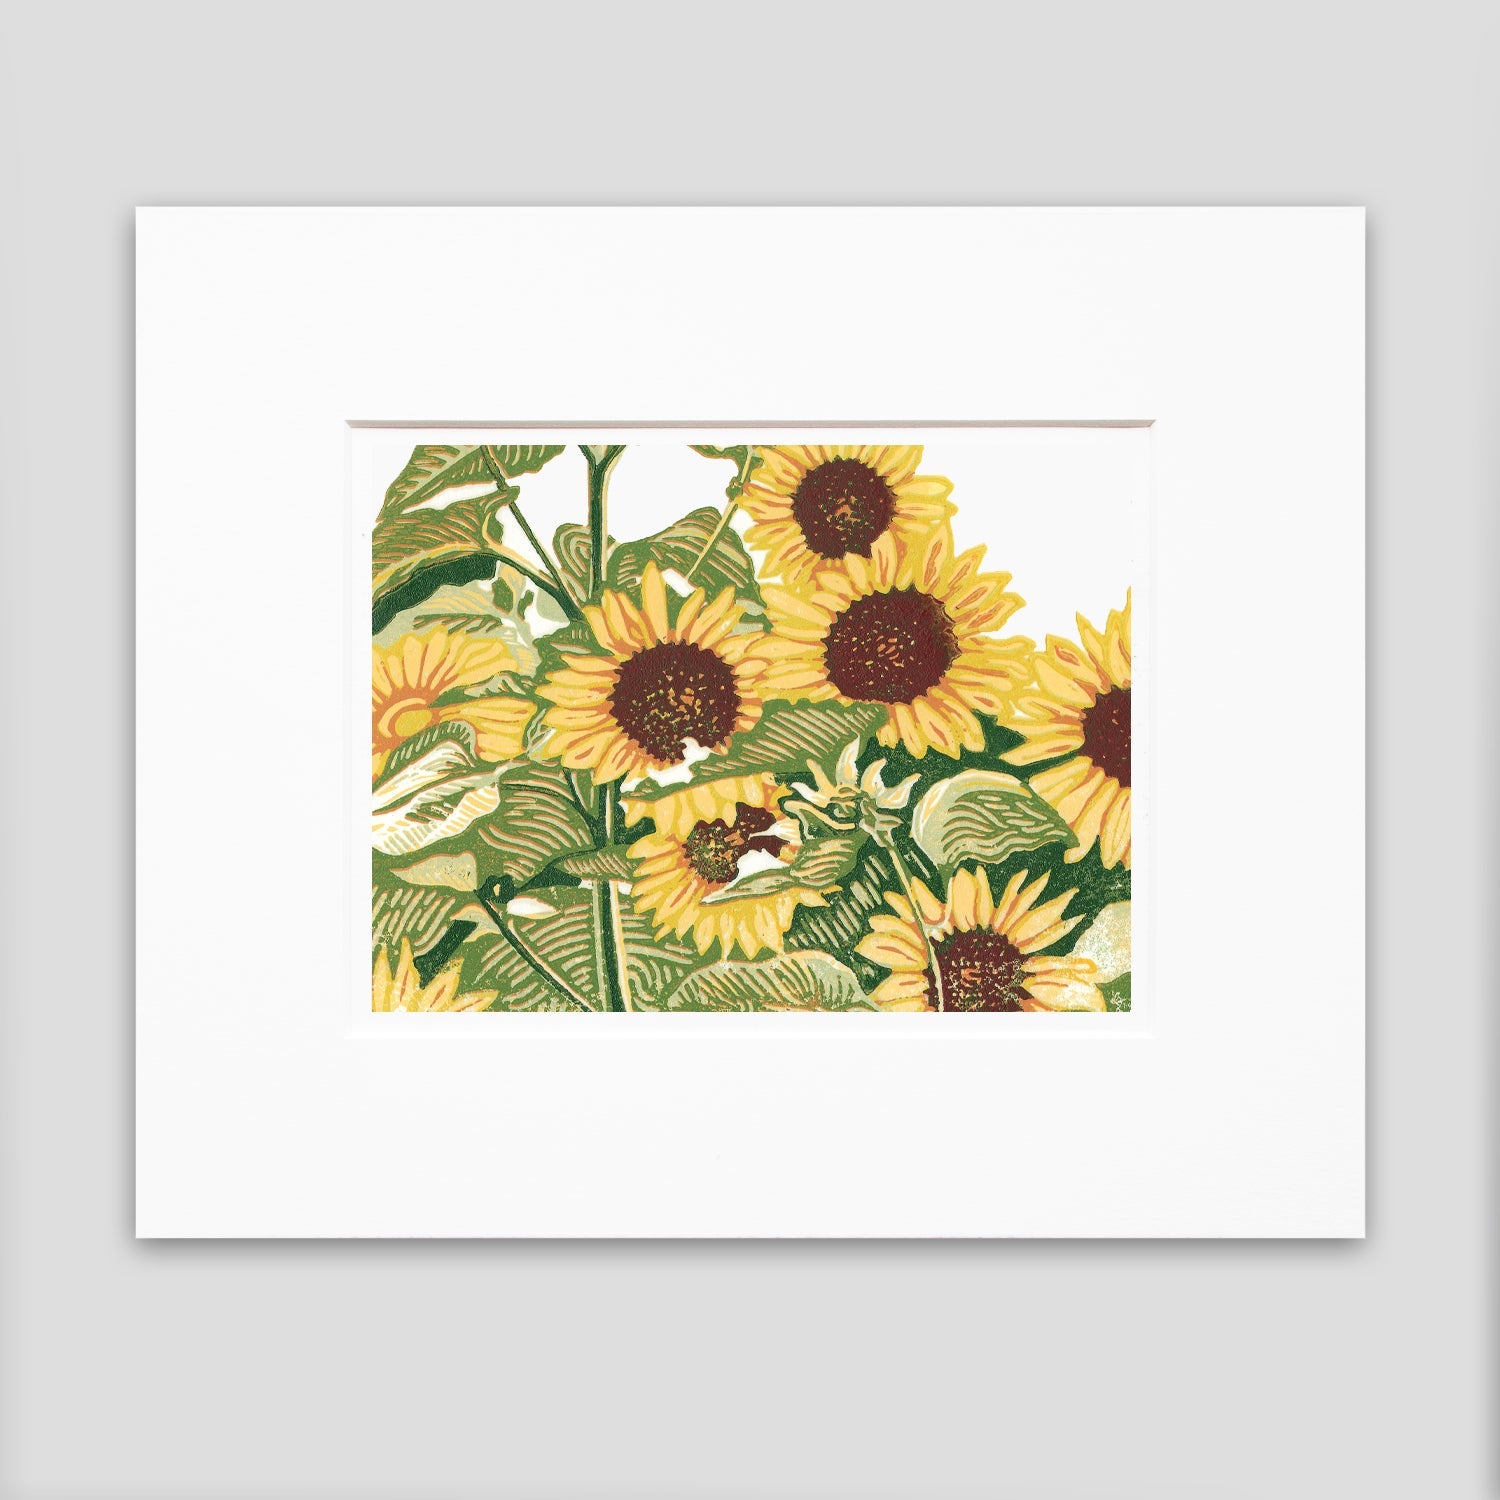 Sunflower Patch is a fun, dynamic hand-pulled and hand-carved seven-color print meant to elicit joy and a sense of belonging.  The floral art was created by Michigan printmaker Natalia Wohletz of Peninsula Prints.